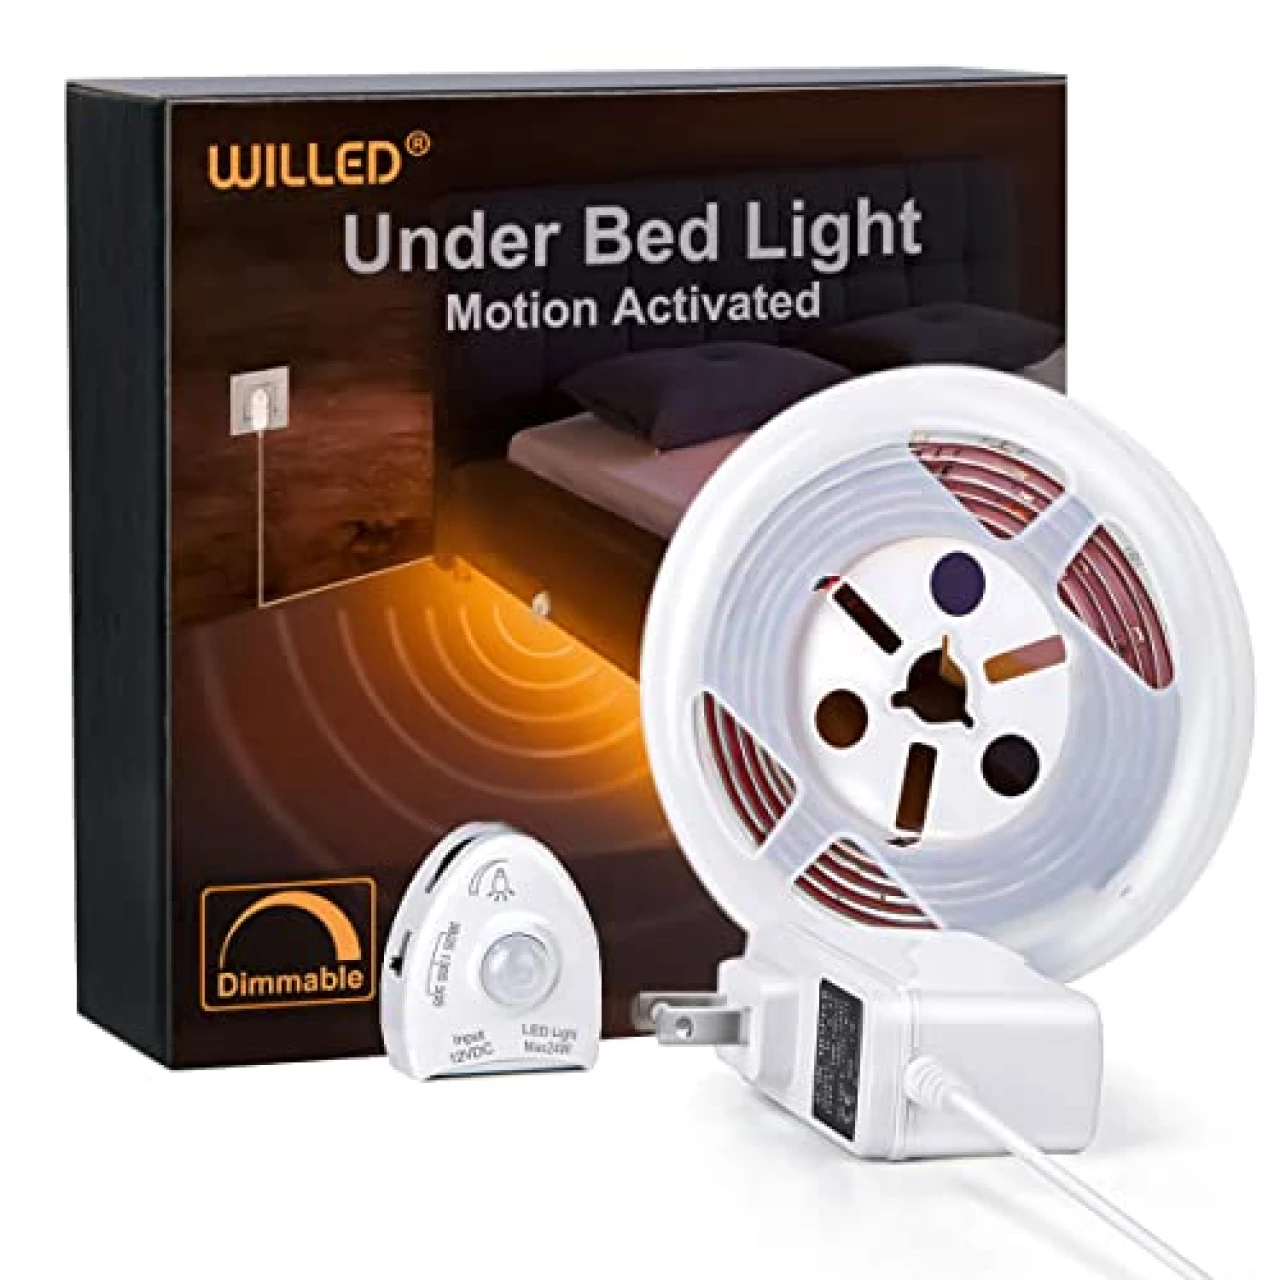 WILLED Under Bed Light, Dimmable Motion Activated Bed Light 5ft LED Strip with Motion Sensor and Power Adapter